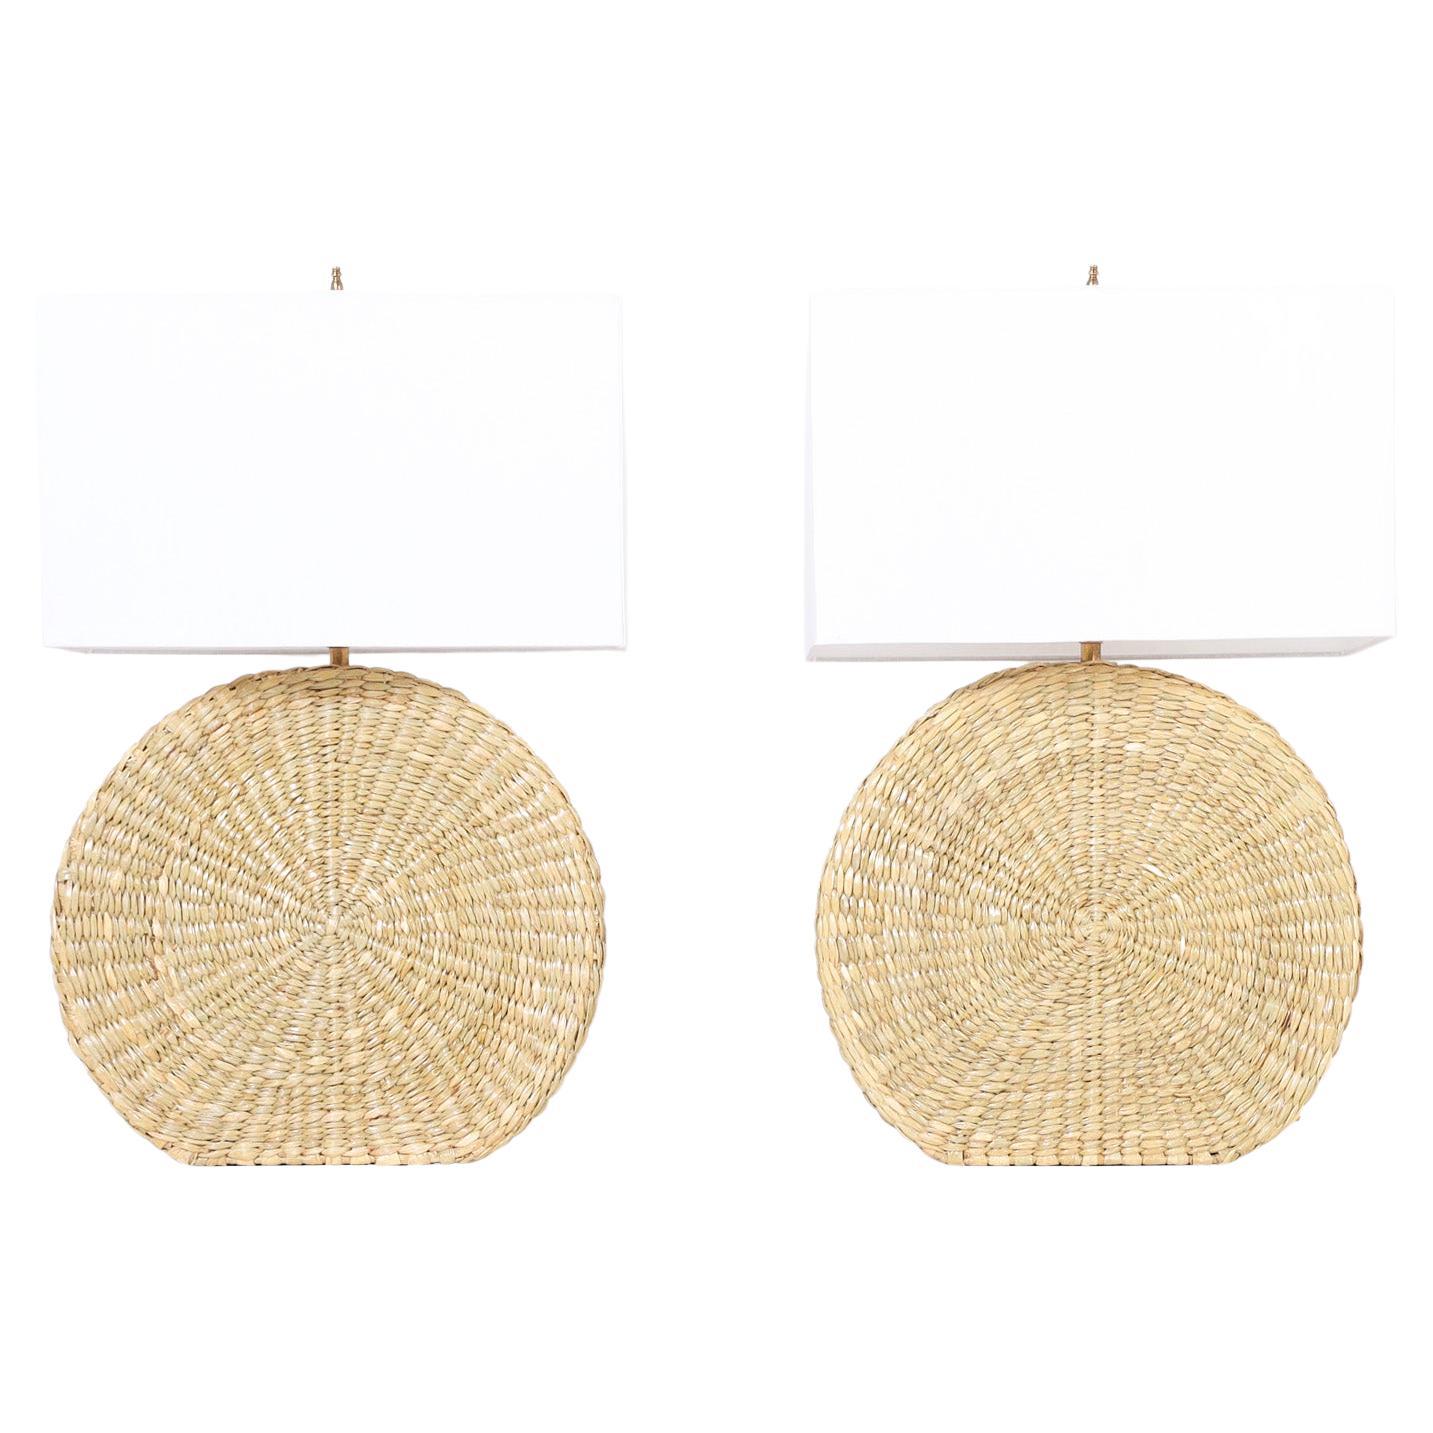 Pair of Spherical Wicker Table Lamps from the Fs Flores Collection For Sale